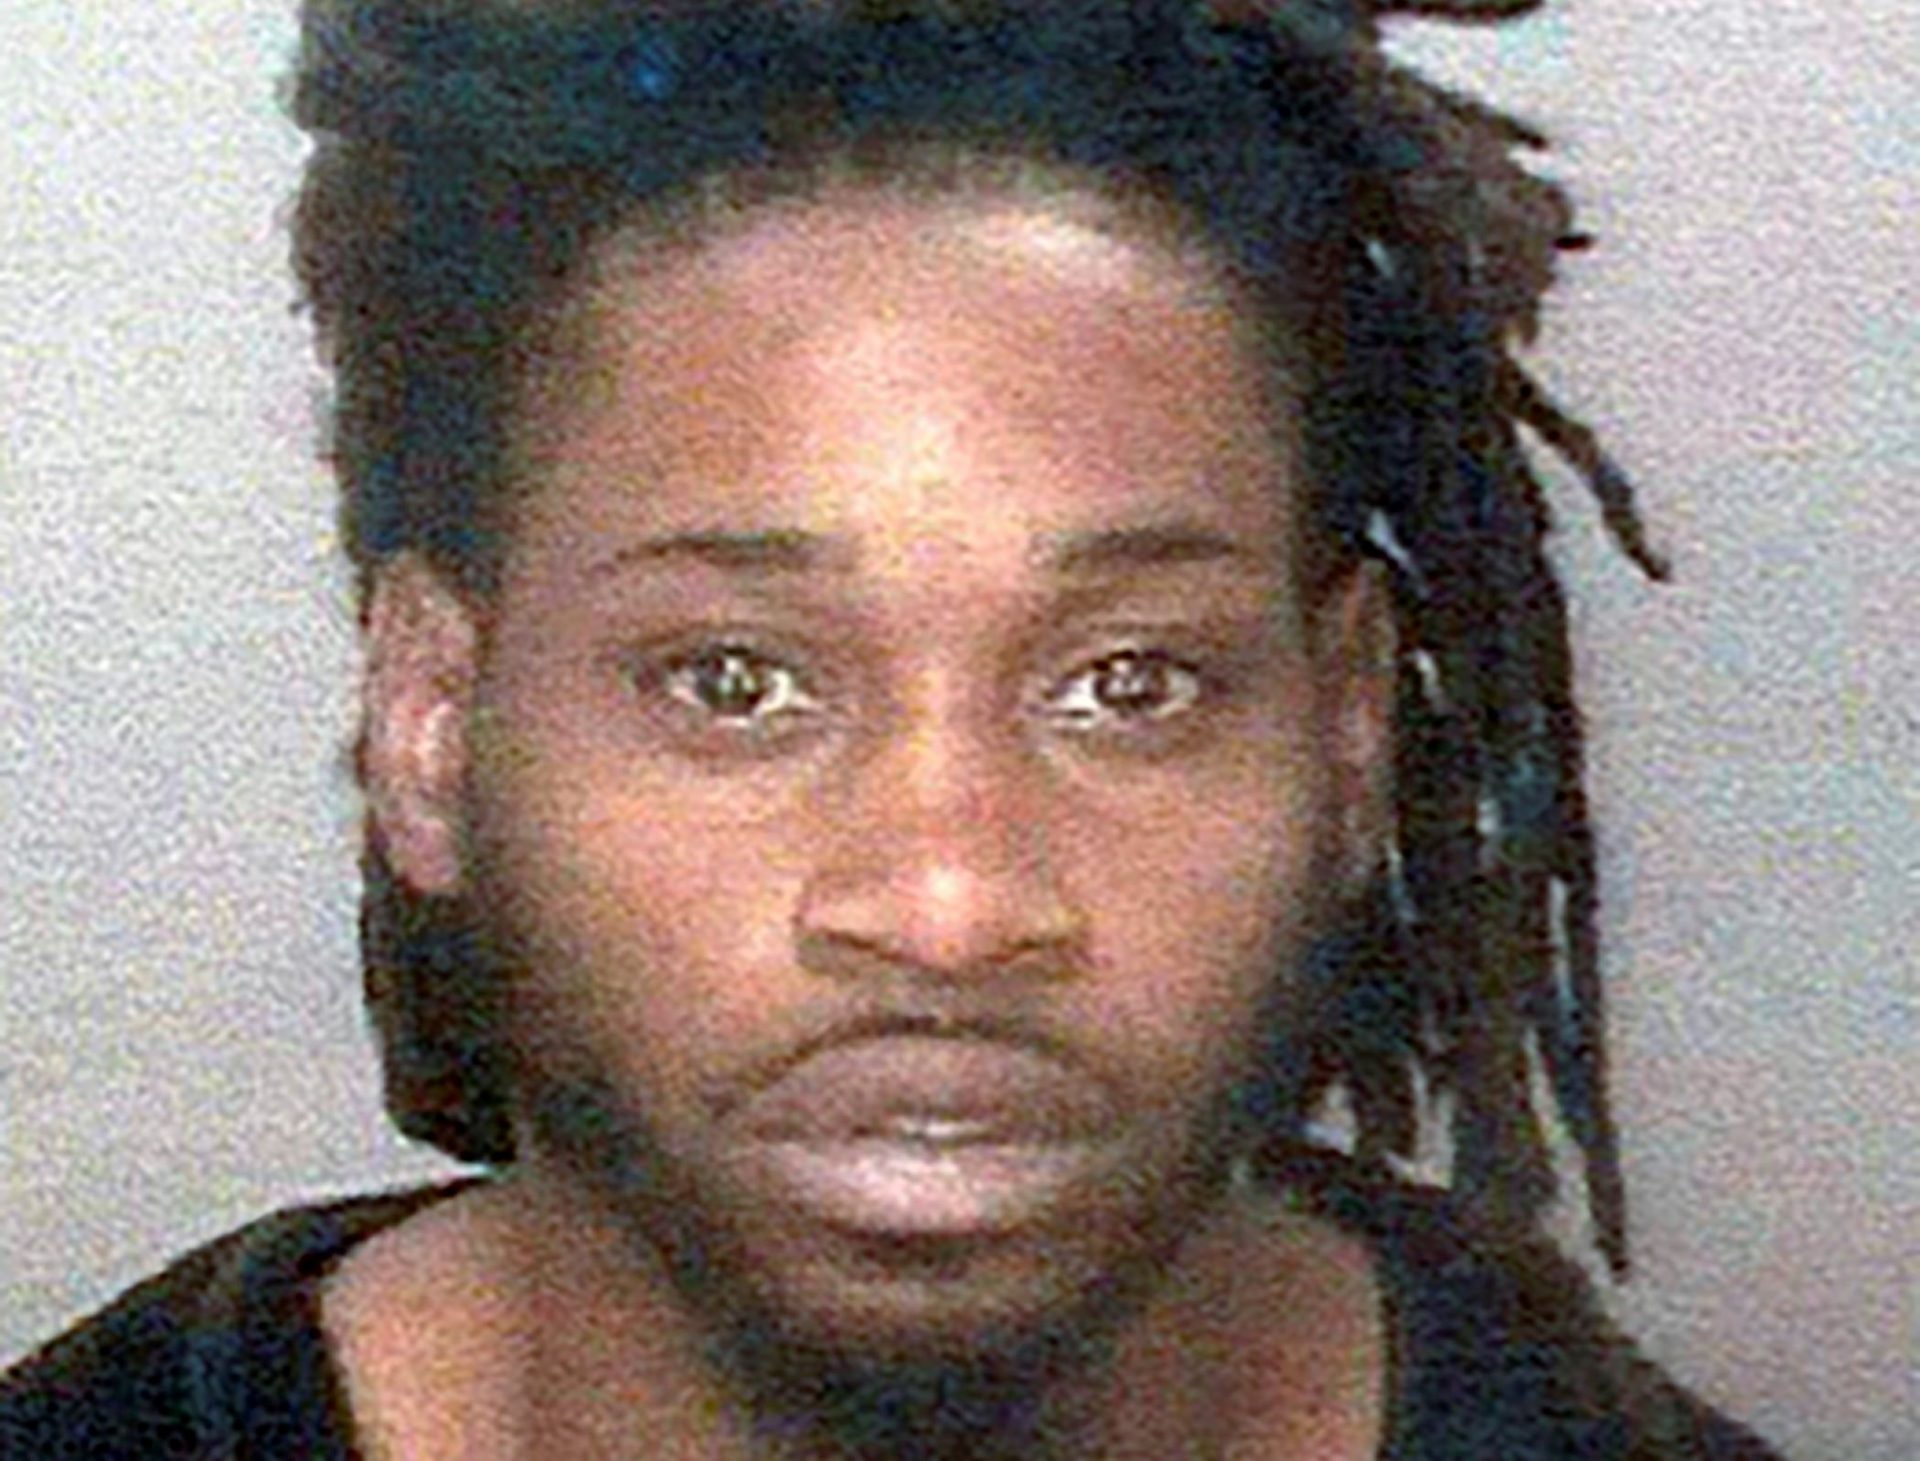 This Thursday, April 1, 2021, photo provided by the Robeson County Sheriff's Office, in Lumberton, N.C., shows Dejywan Floyd, of Lumberton. Floyd has been charged with first-degree murder in a road rage shooting the week before that left a Pennsylvania woman dead.